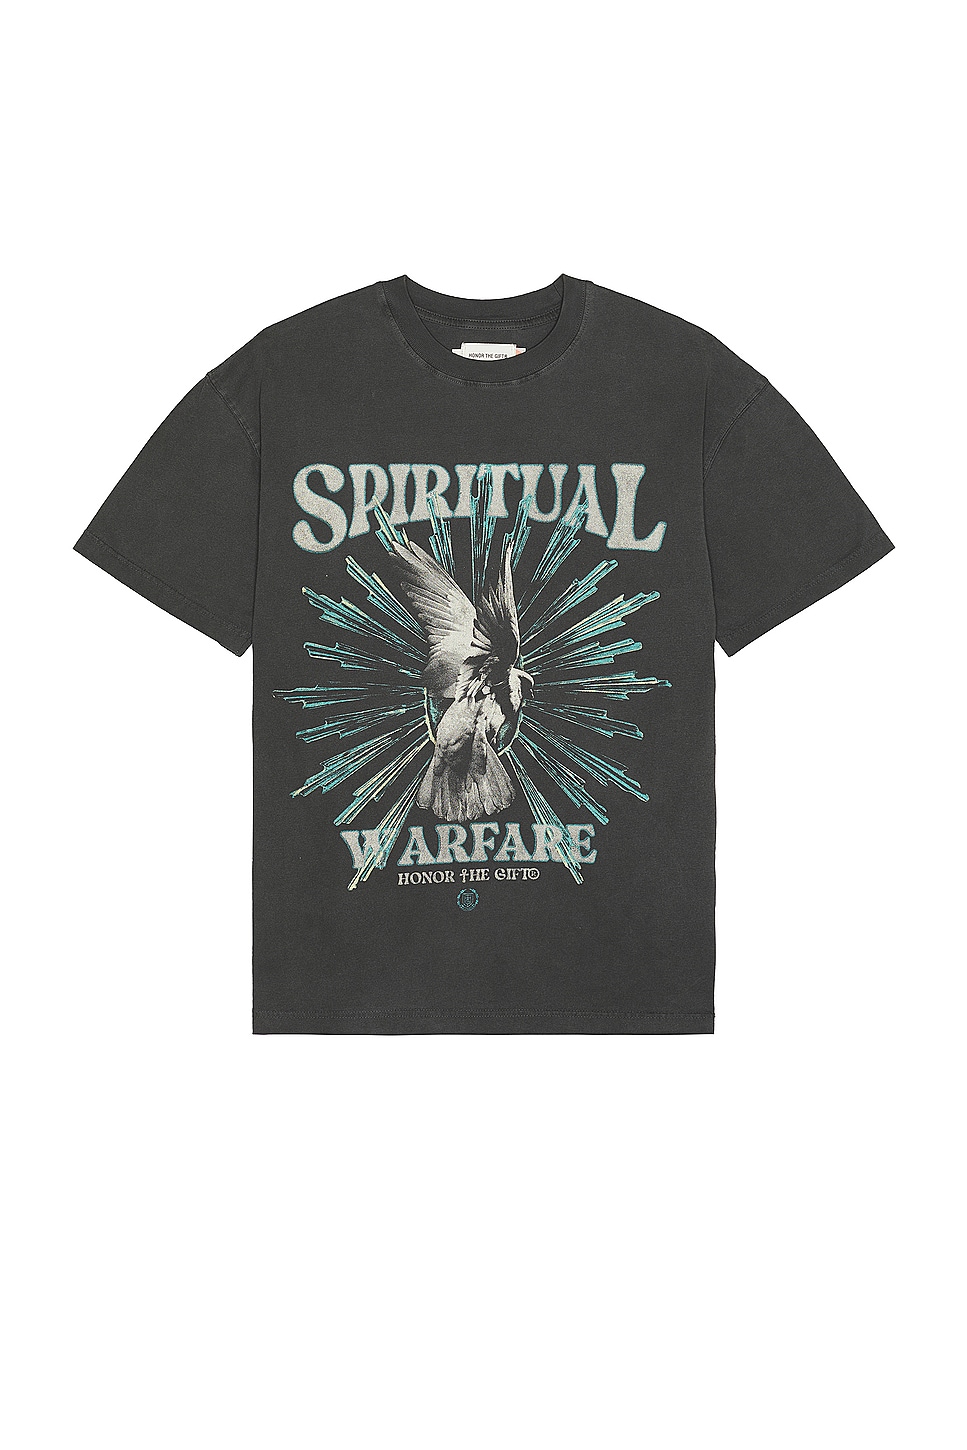 A-spring Spiritual Conflict Tee in Black